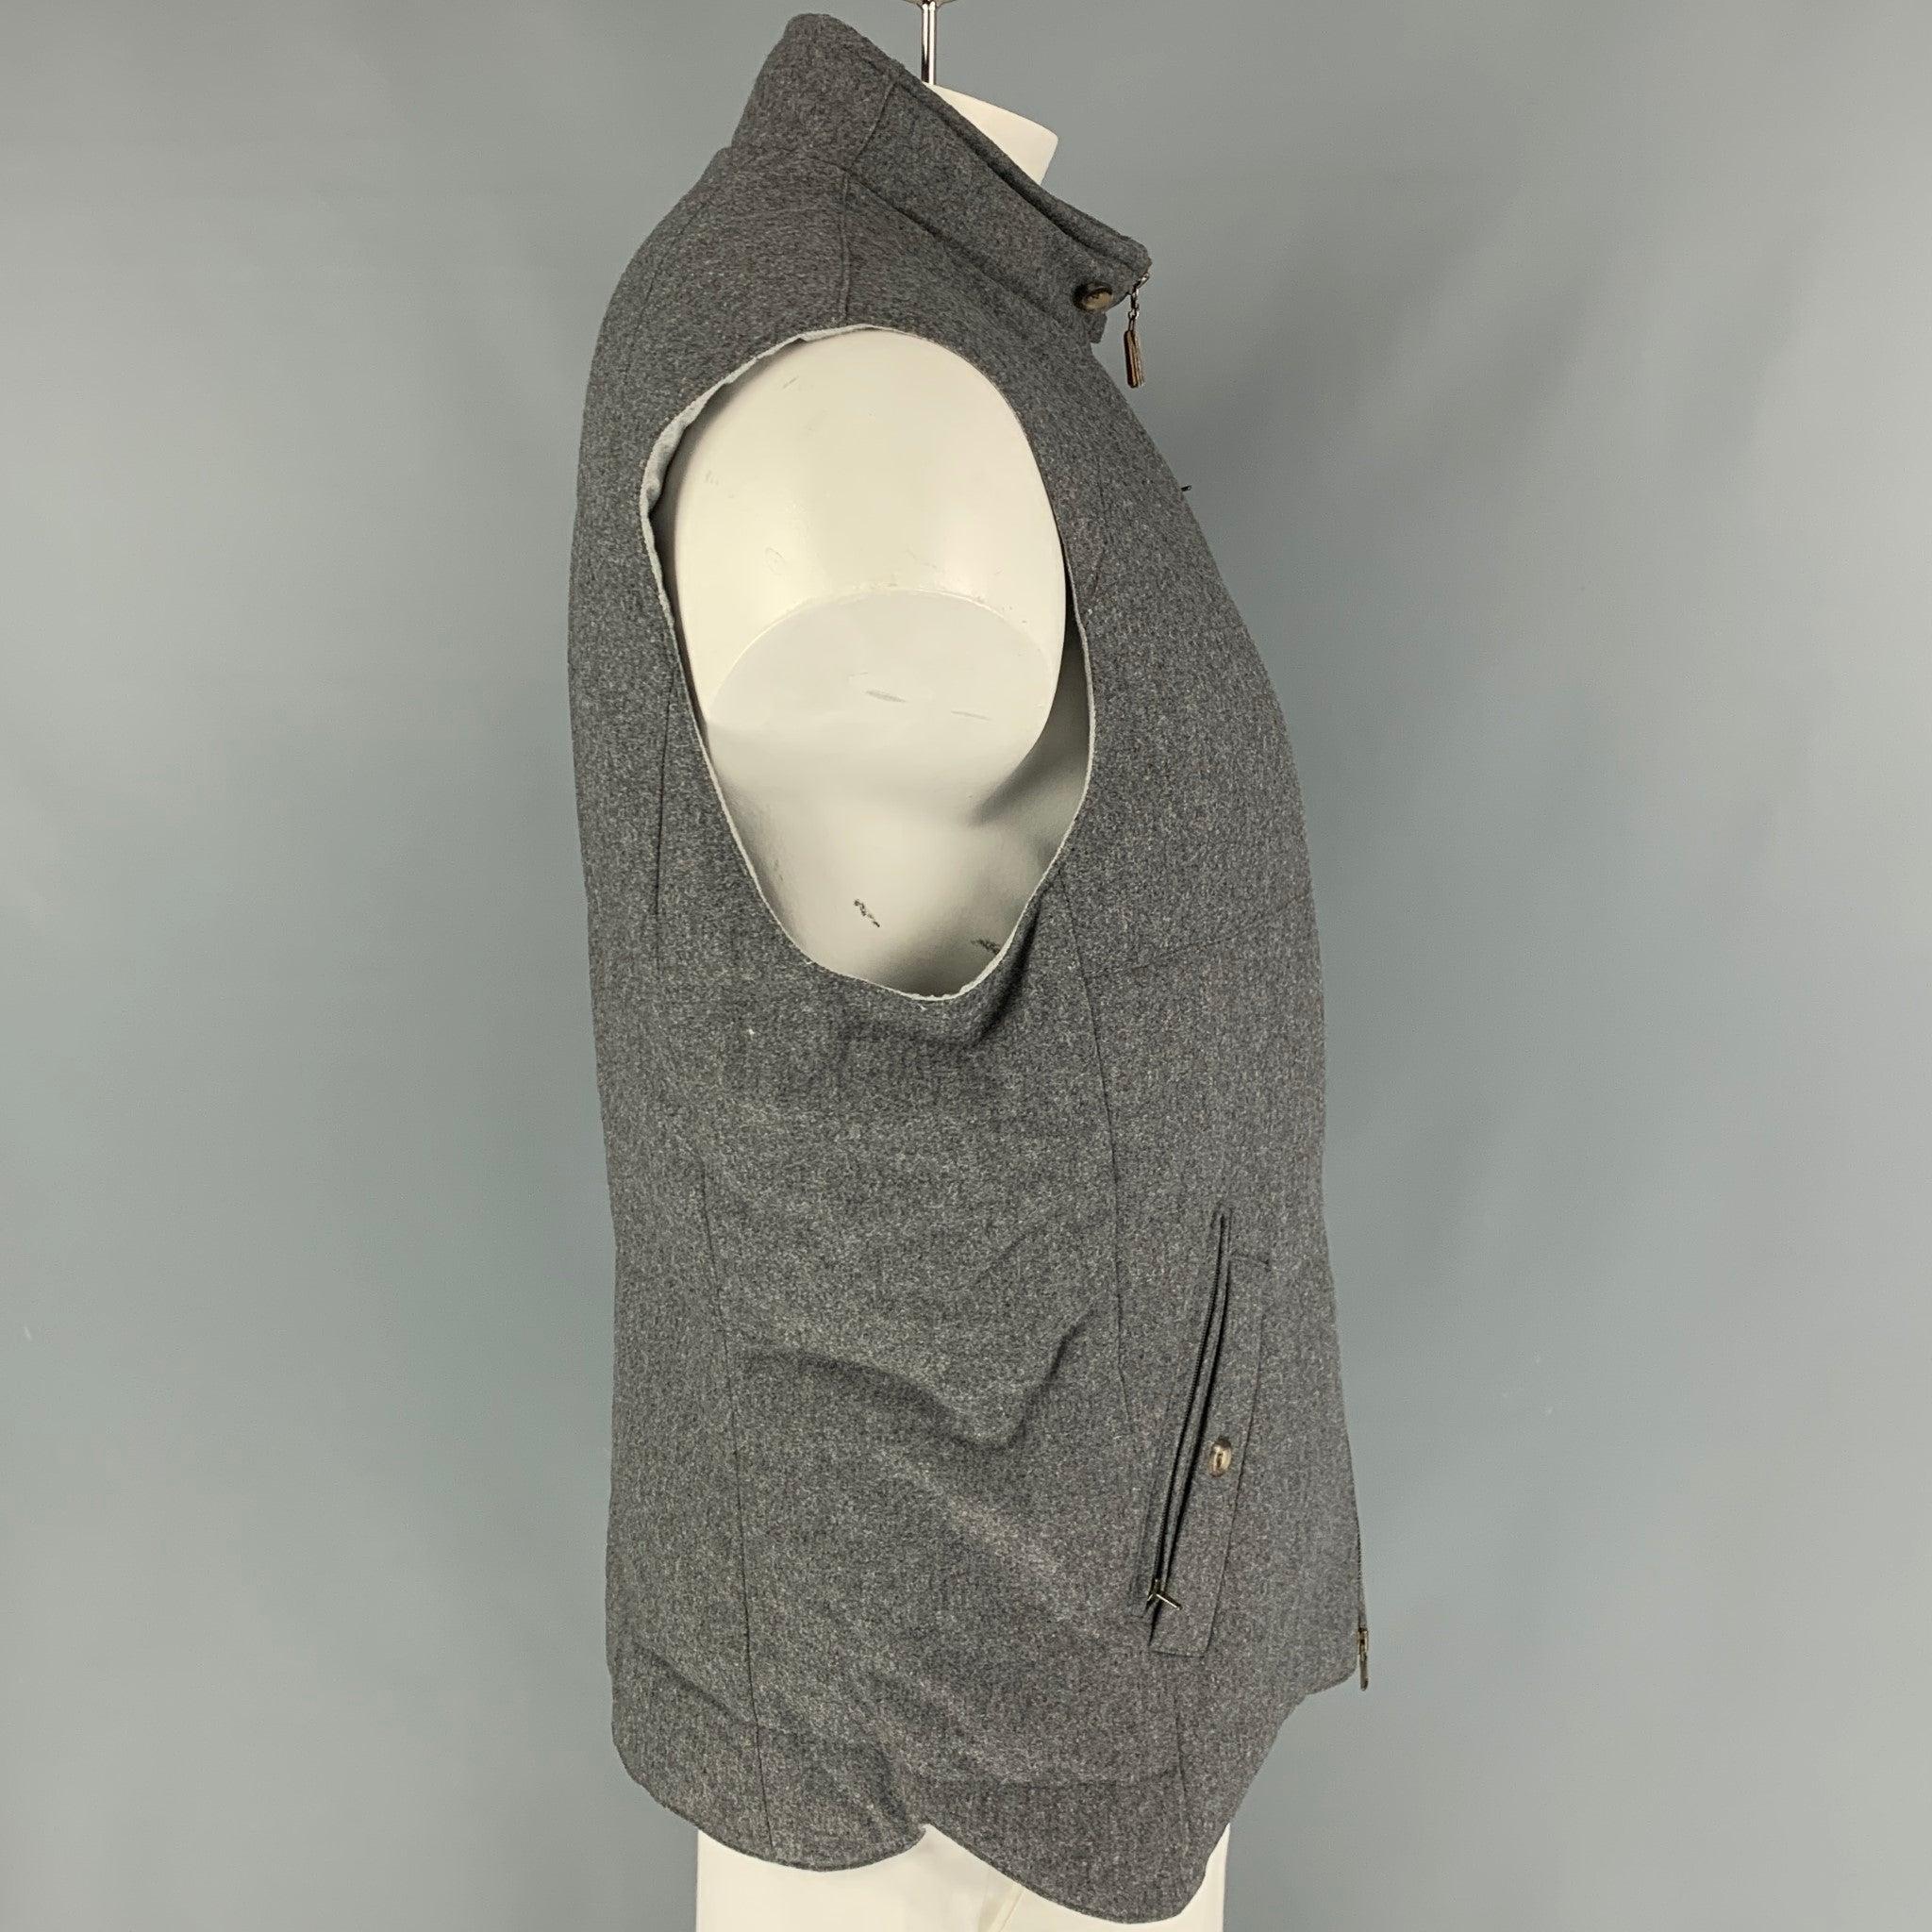 BRUNELLO CUCINELLI vest comes in a grey quilted wool / cashmere featuring a buttoned collar, front pockets, and a zip up closure. Made in Italy. New With Tags.
 

Marked:   XL 

Measurements: 
 
Shoulder: 19 inches  Chest: 48 inches  Length: 28